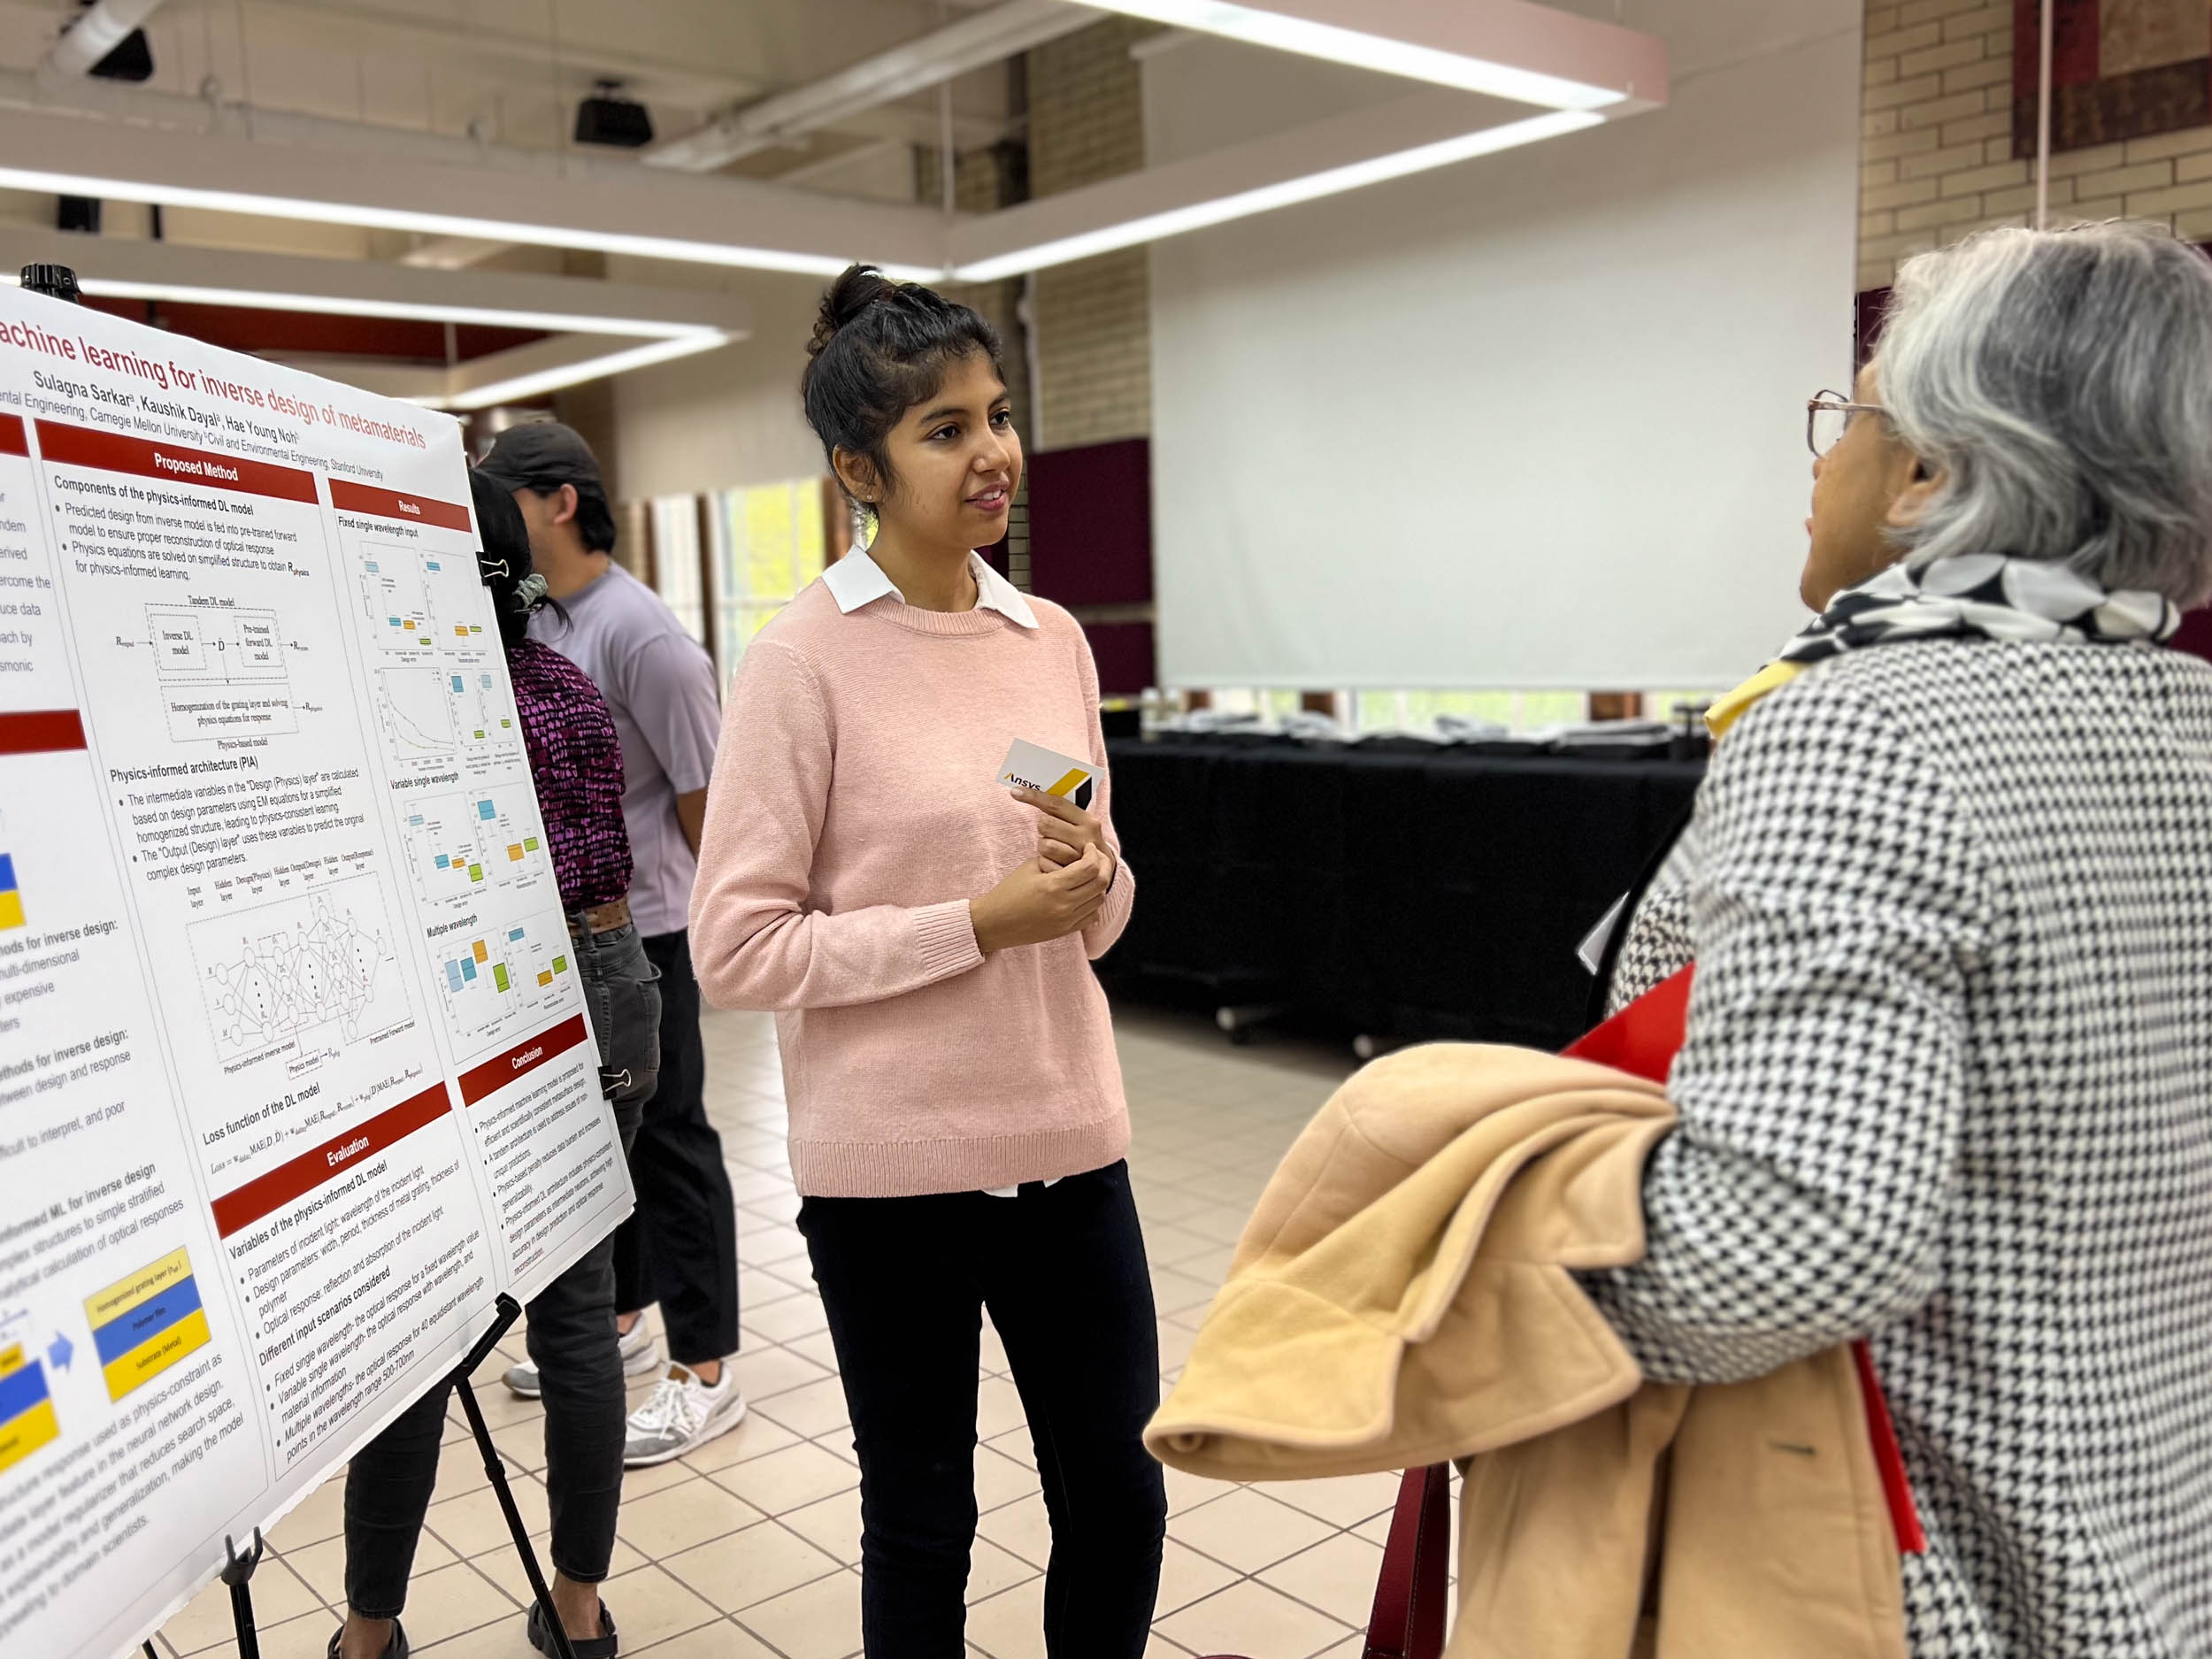 Student speaks with guest at poster session